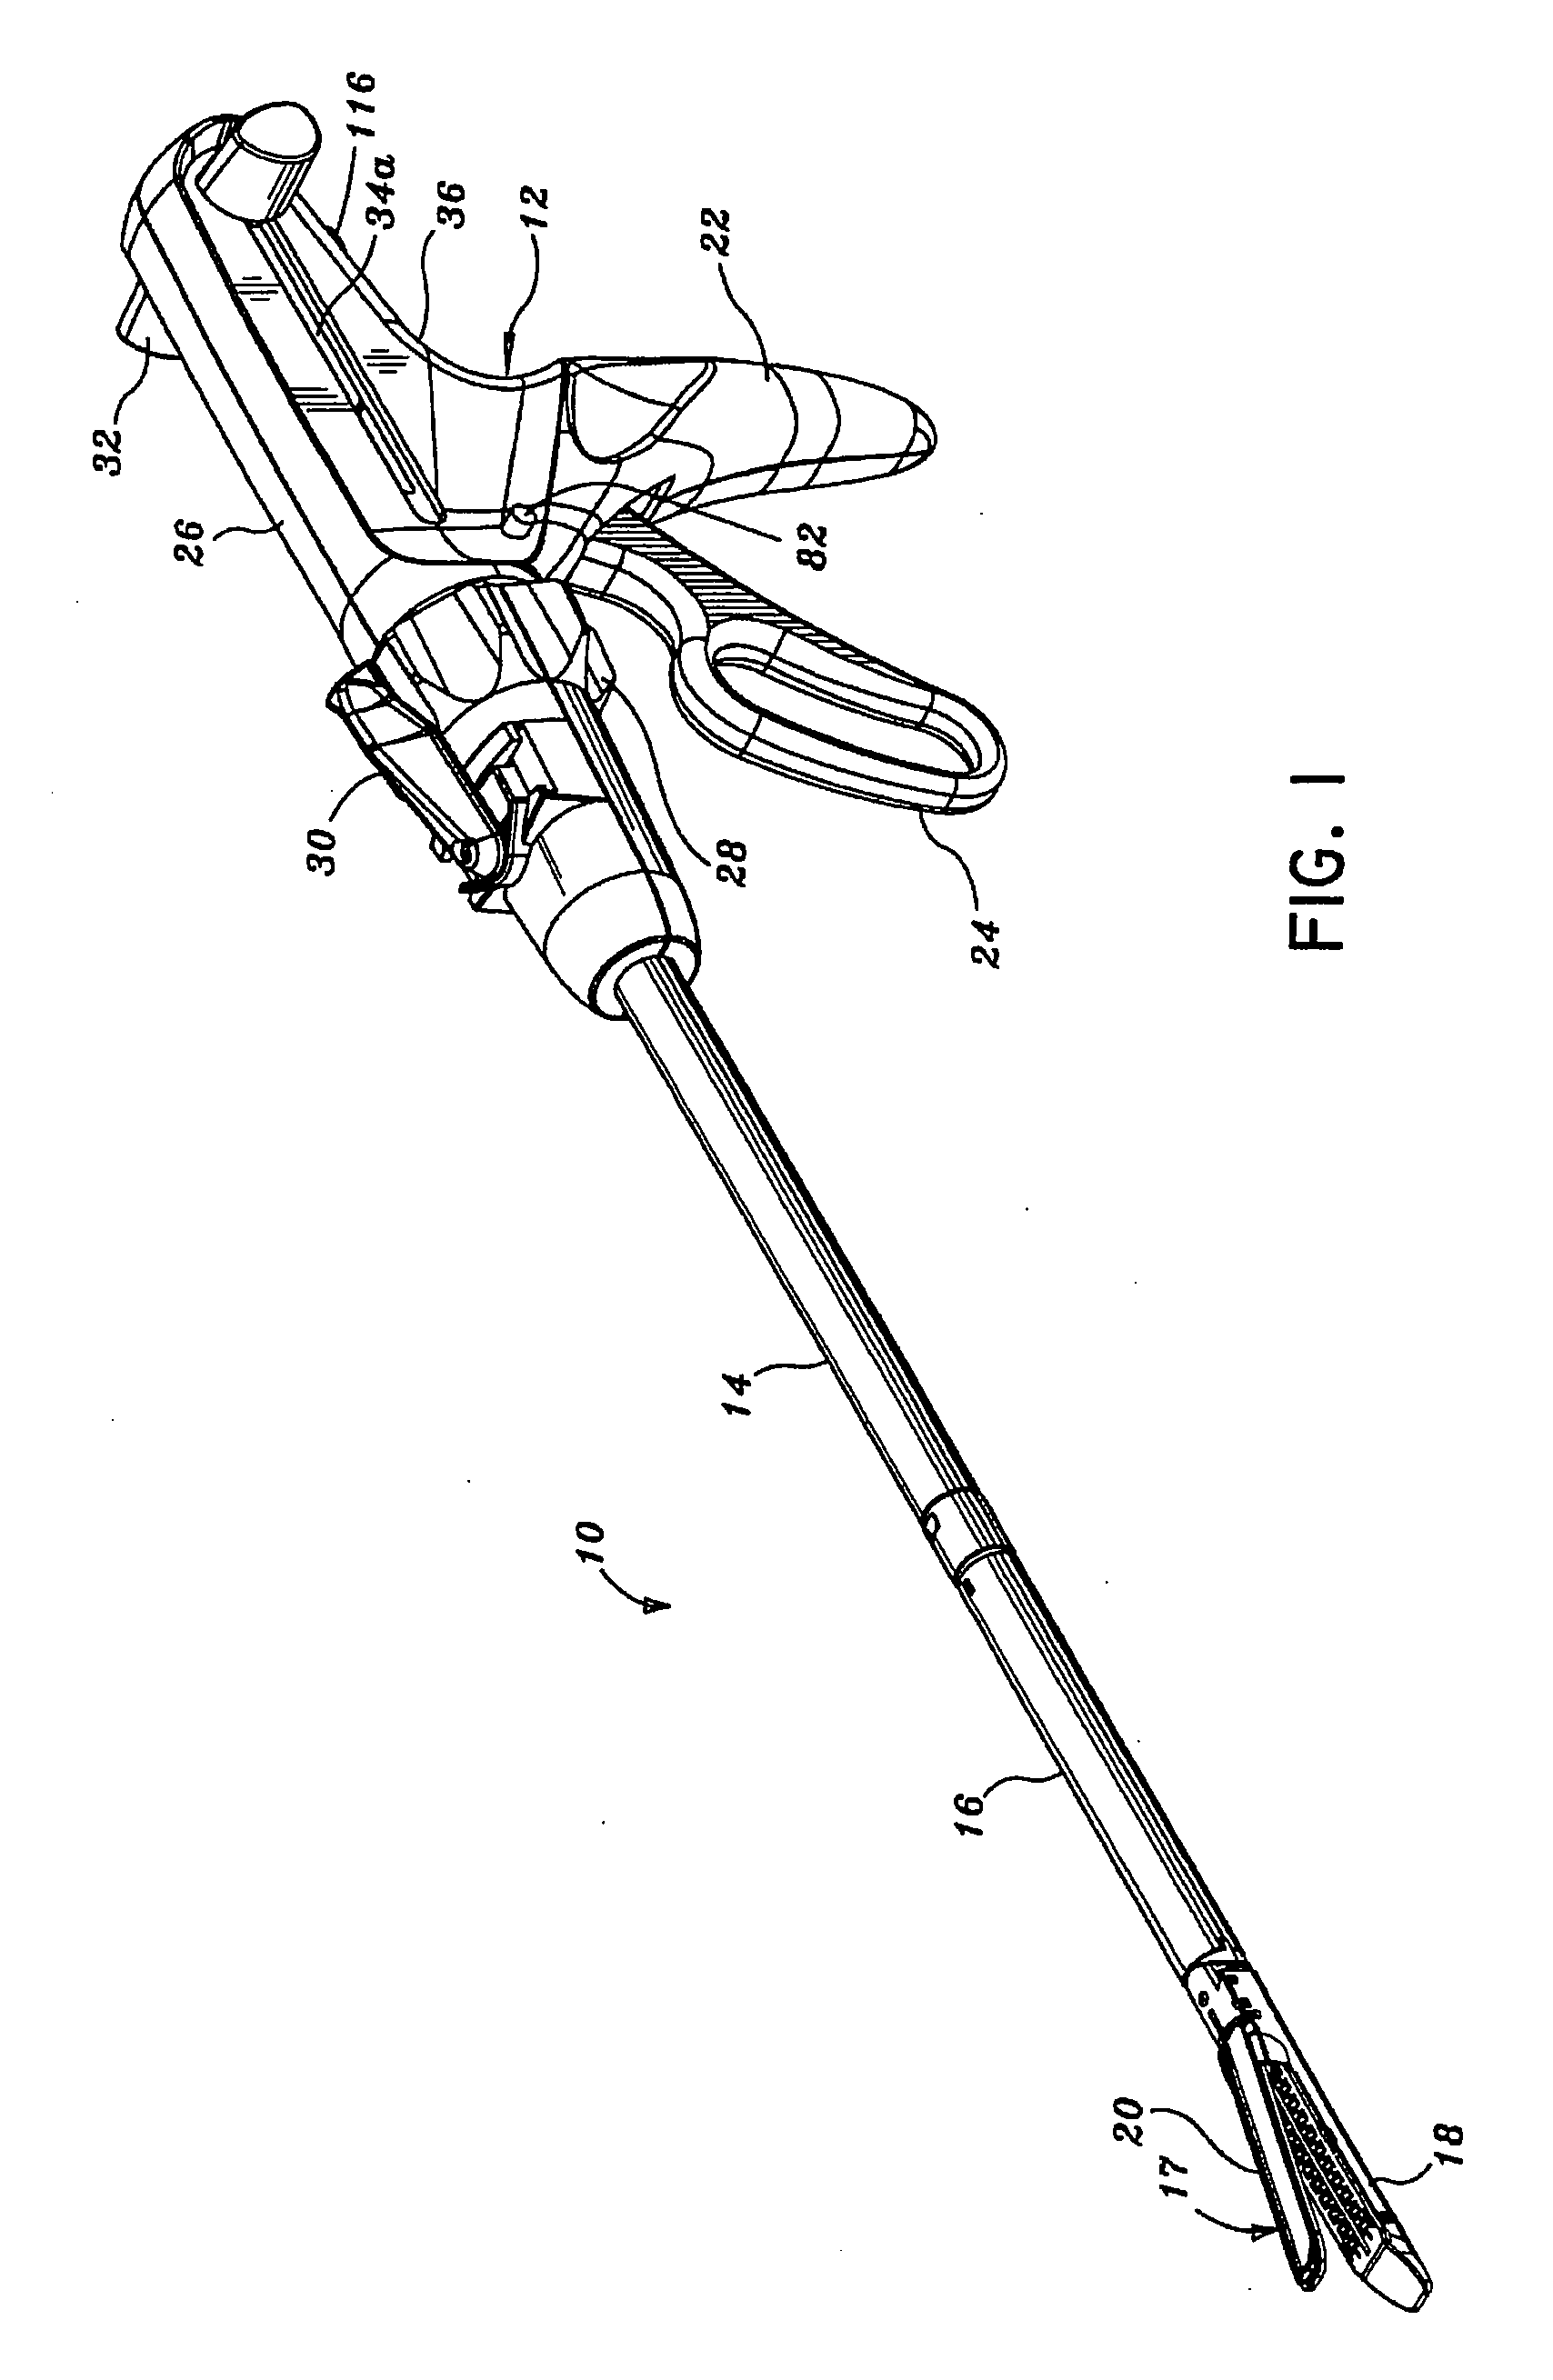 Disposable loading units for a surgical cutting and stapling instrument